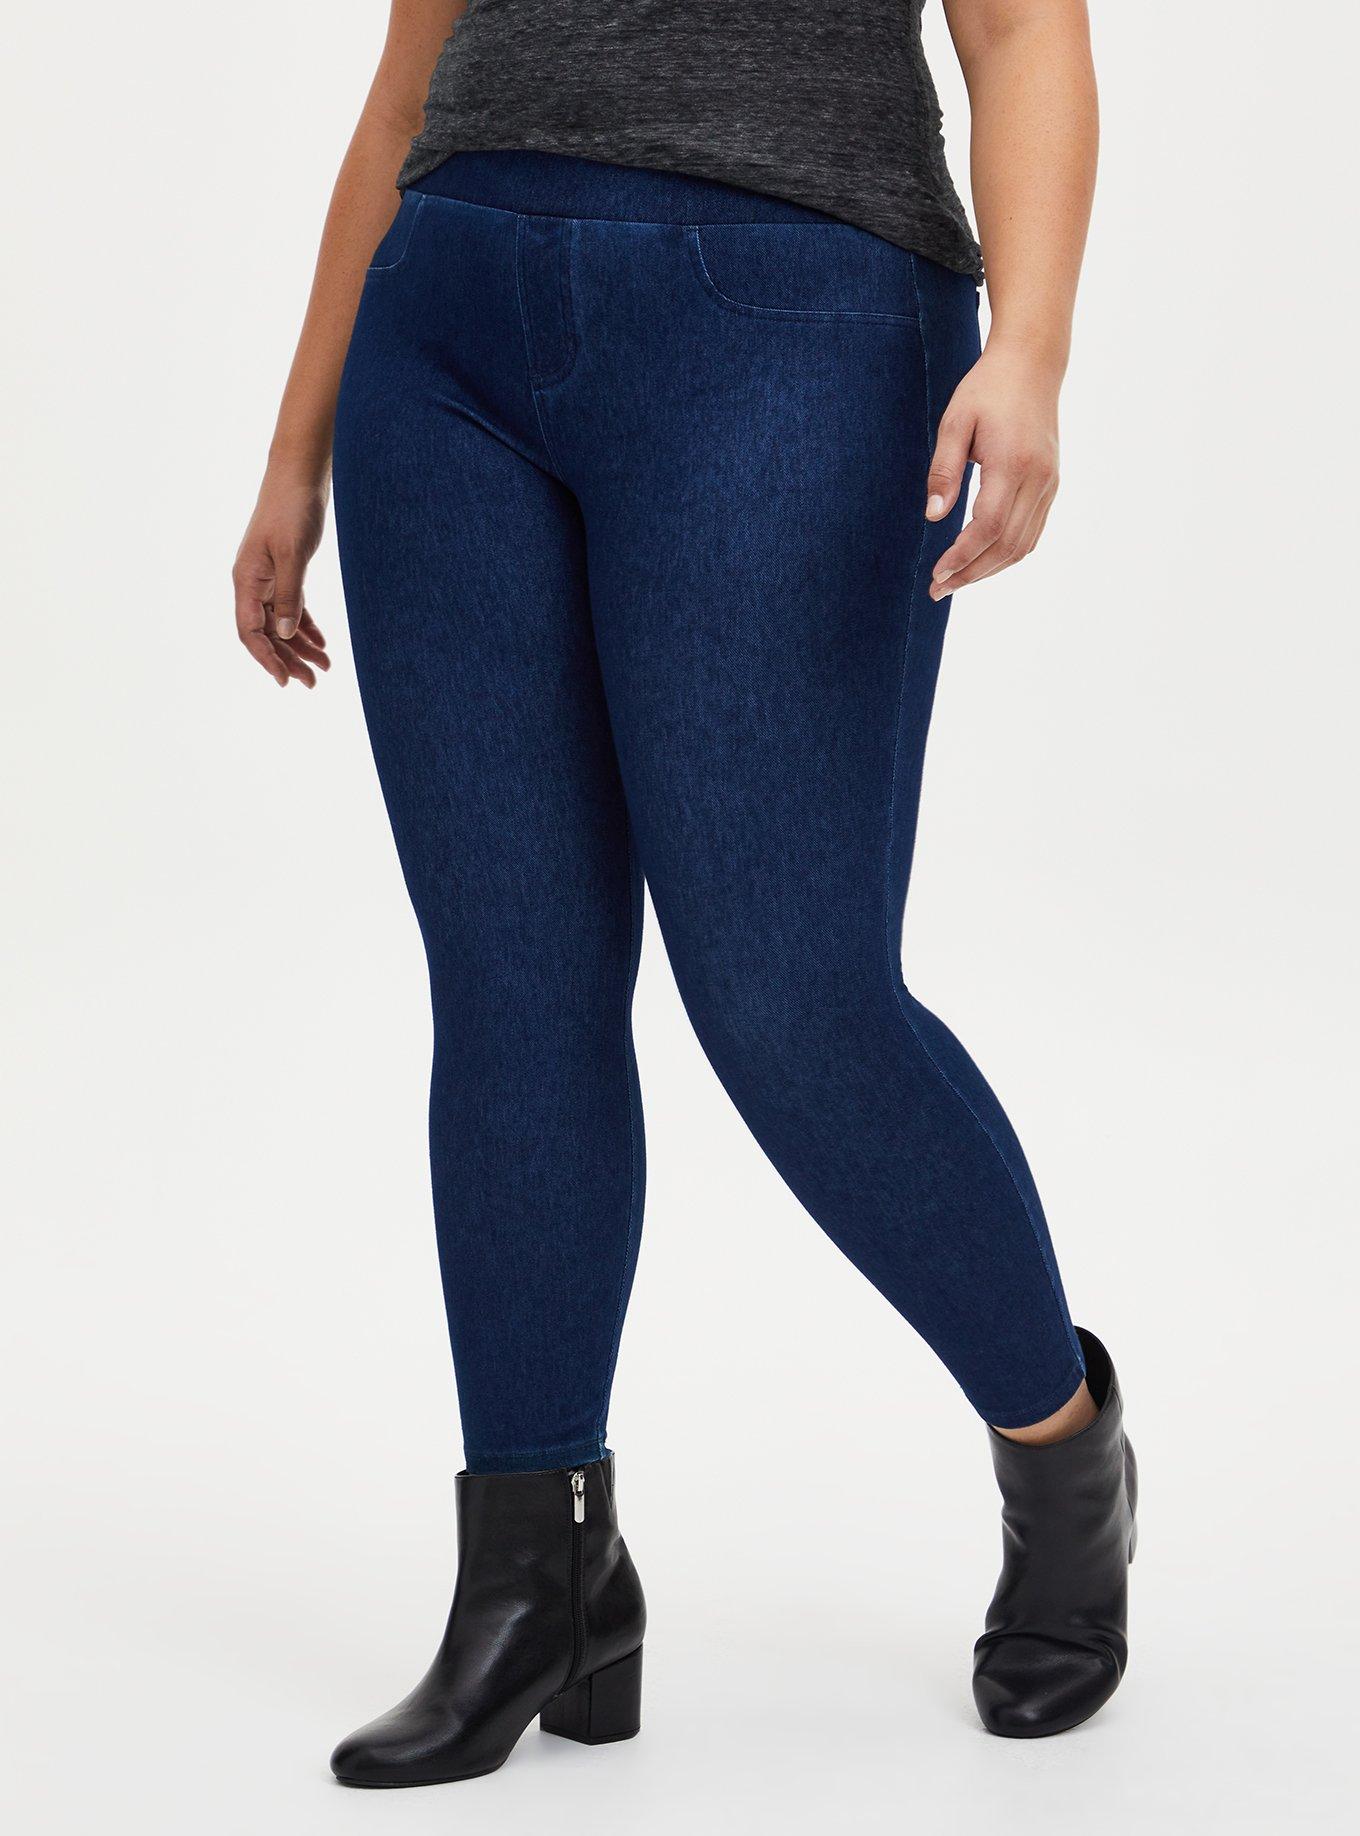 10-12 Colours Perfect Denim fit Legging with Denim Look, Size: Free Size at  Rs 250 in Tiruppur